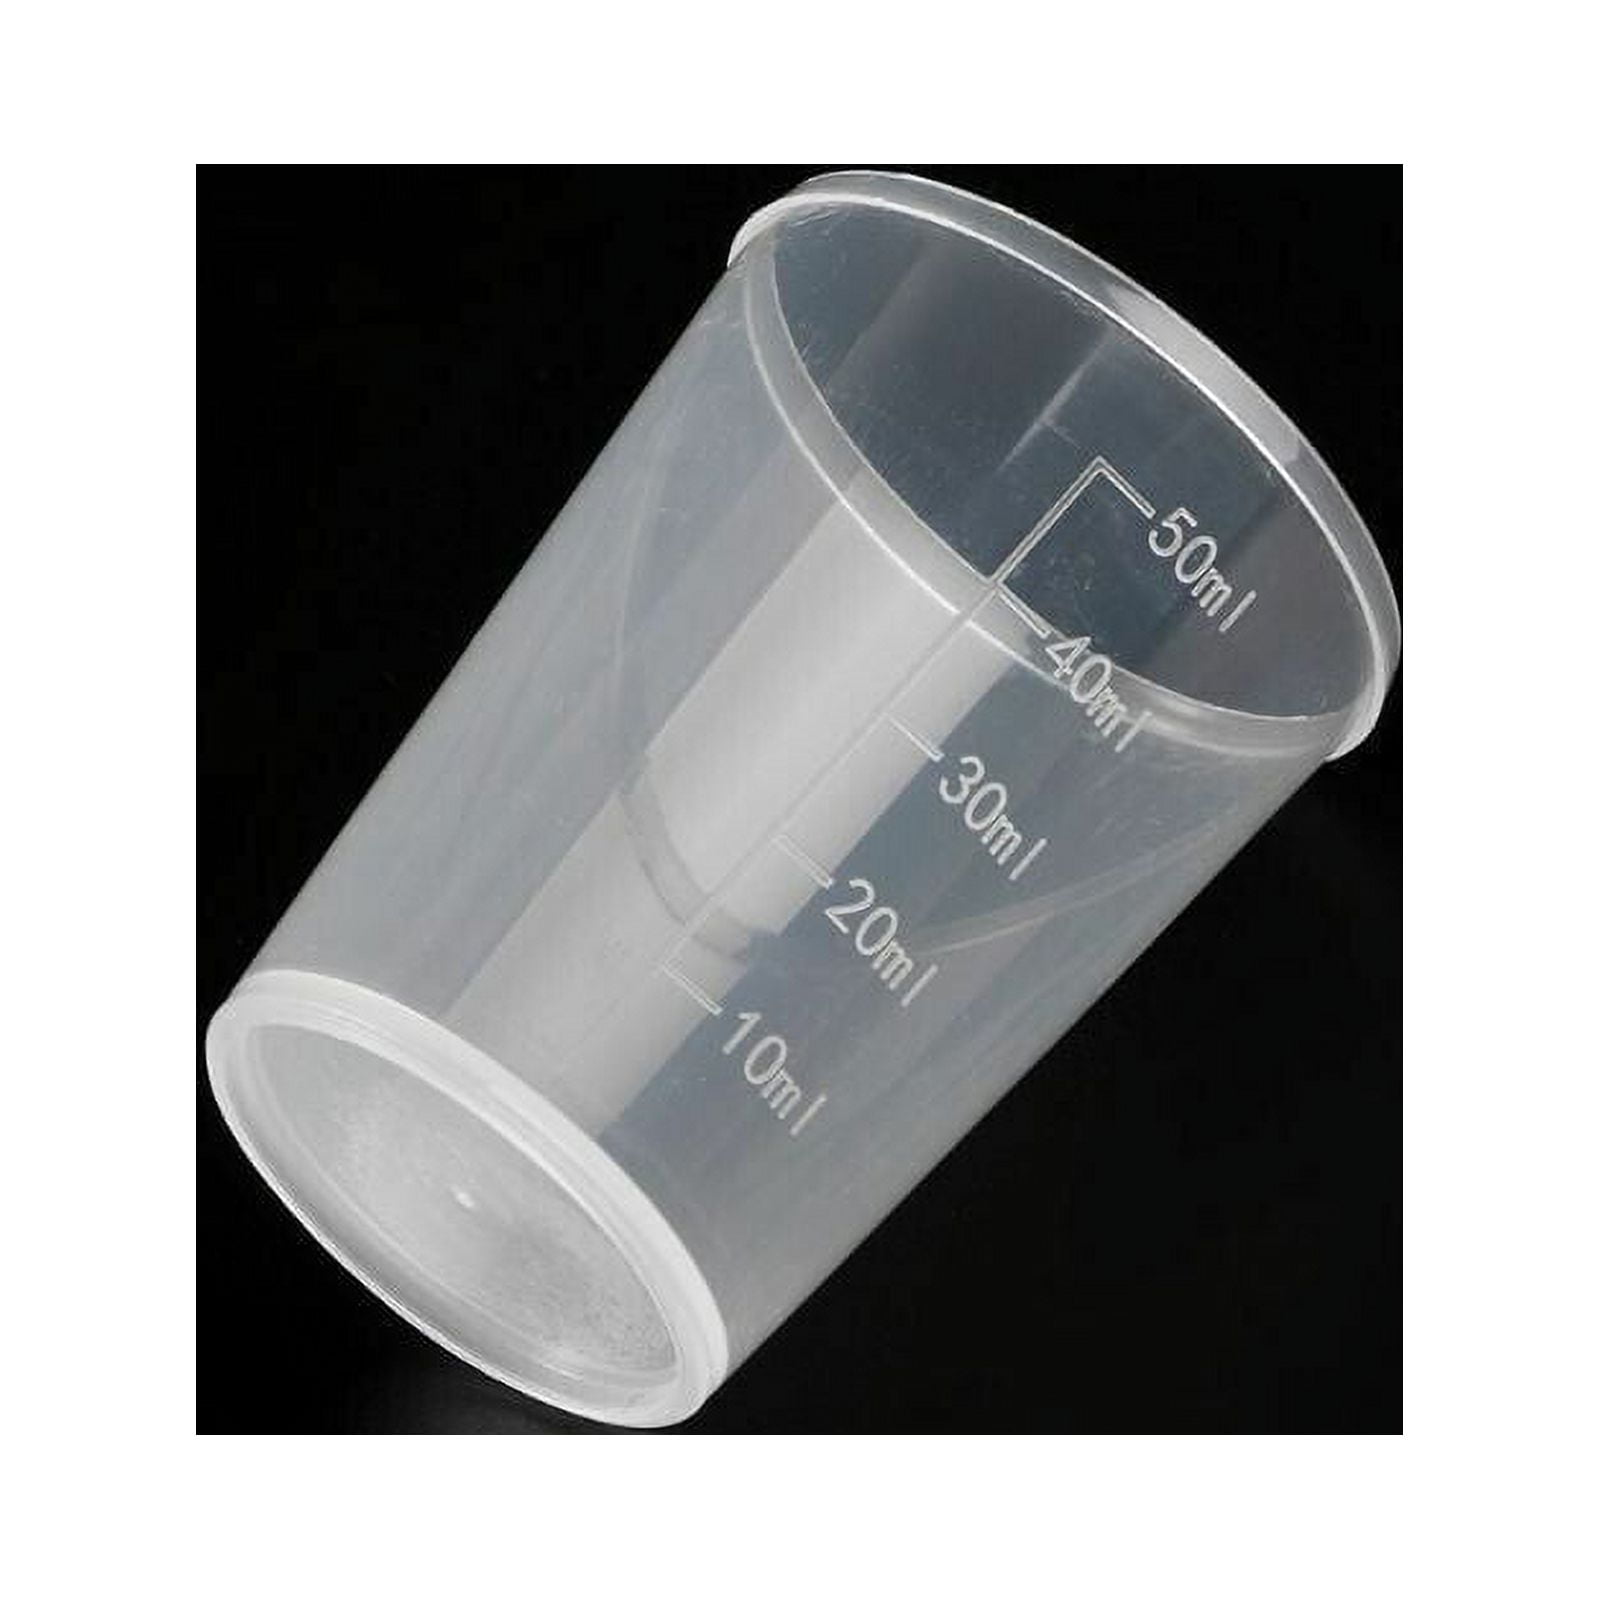 Set of 30 mini measuring cups (50 ml, transparent, PP, for